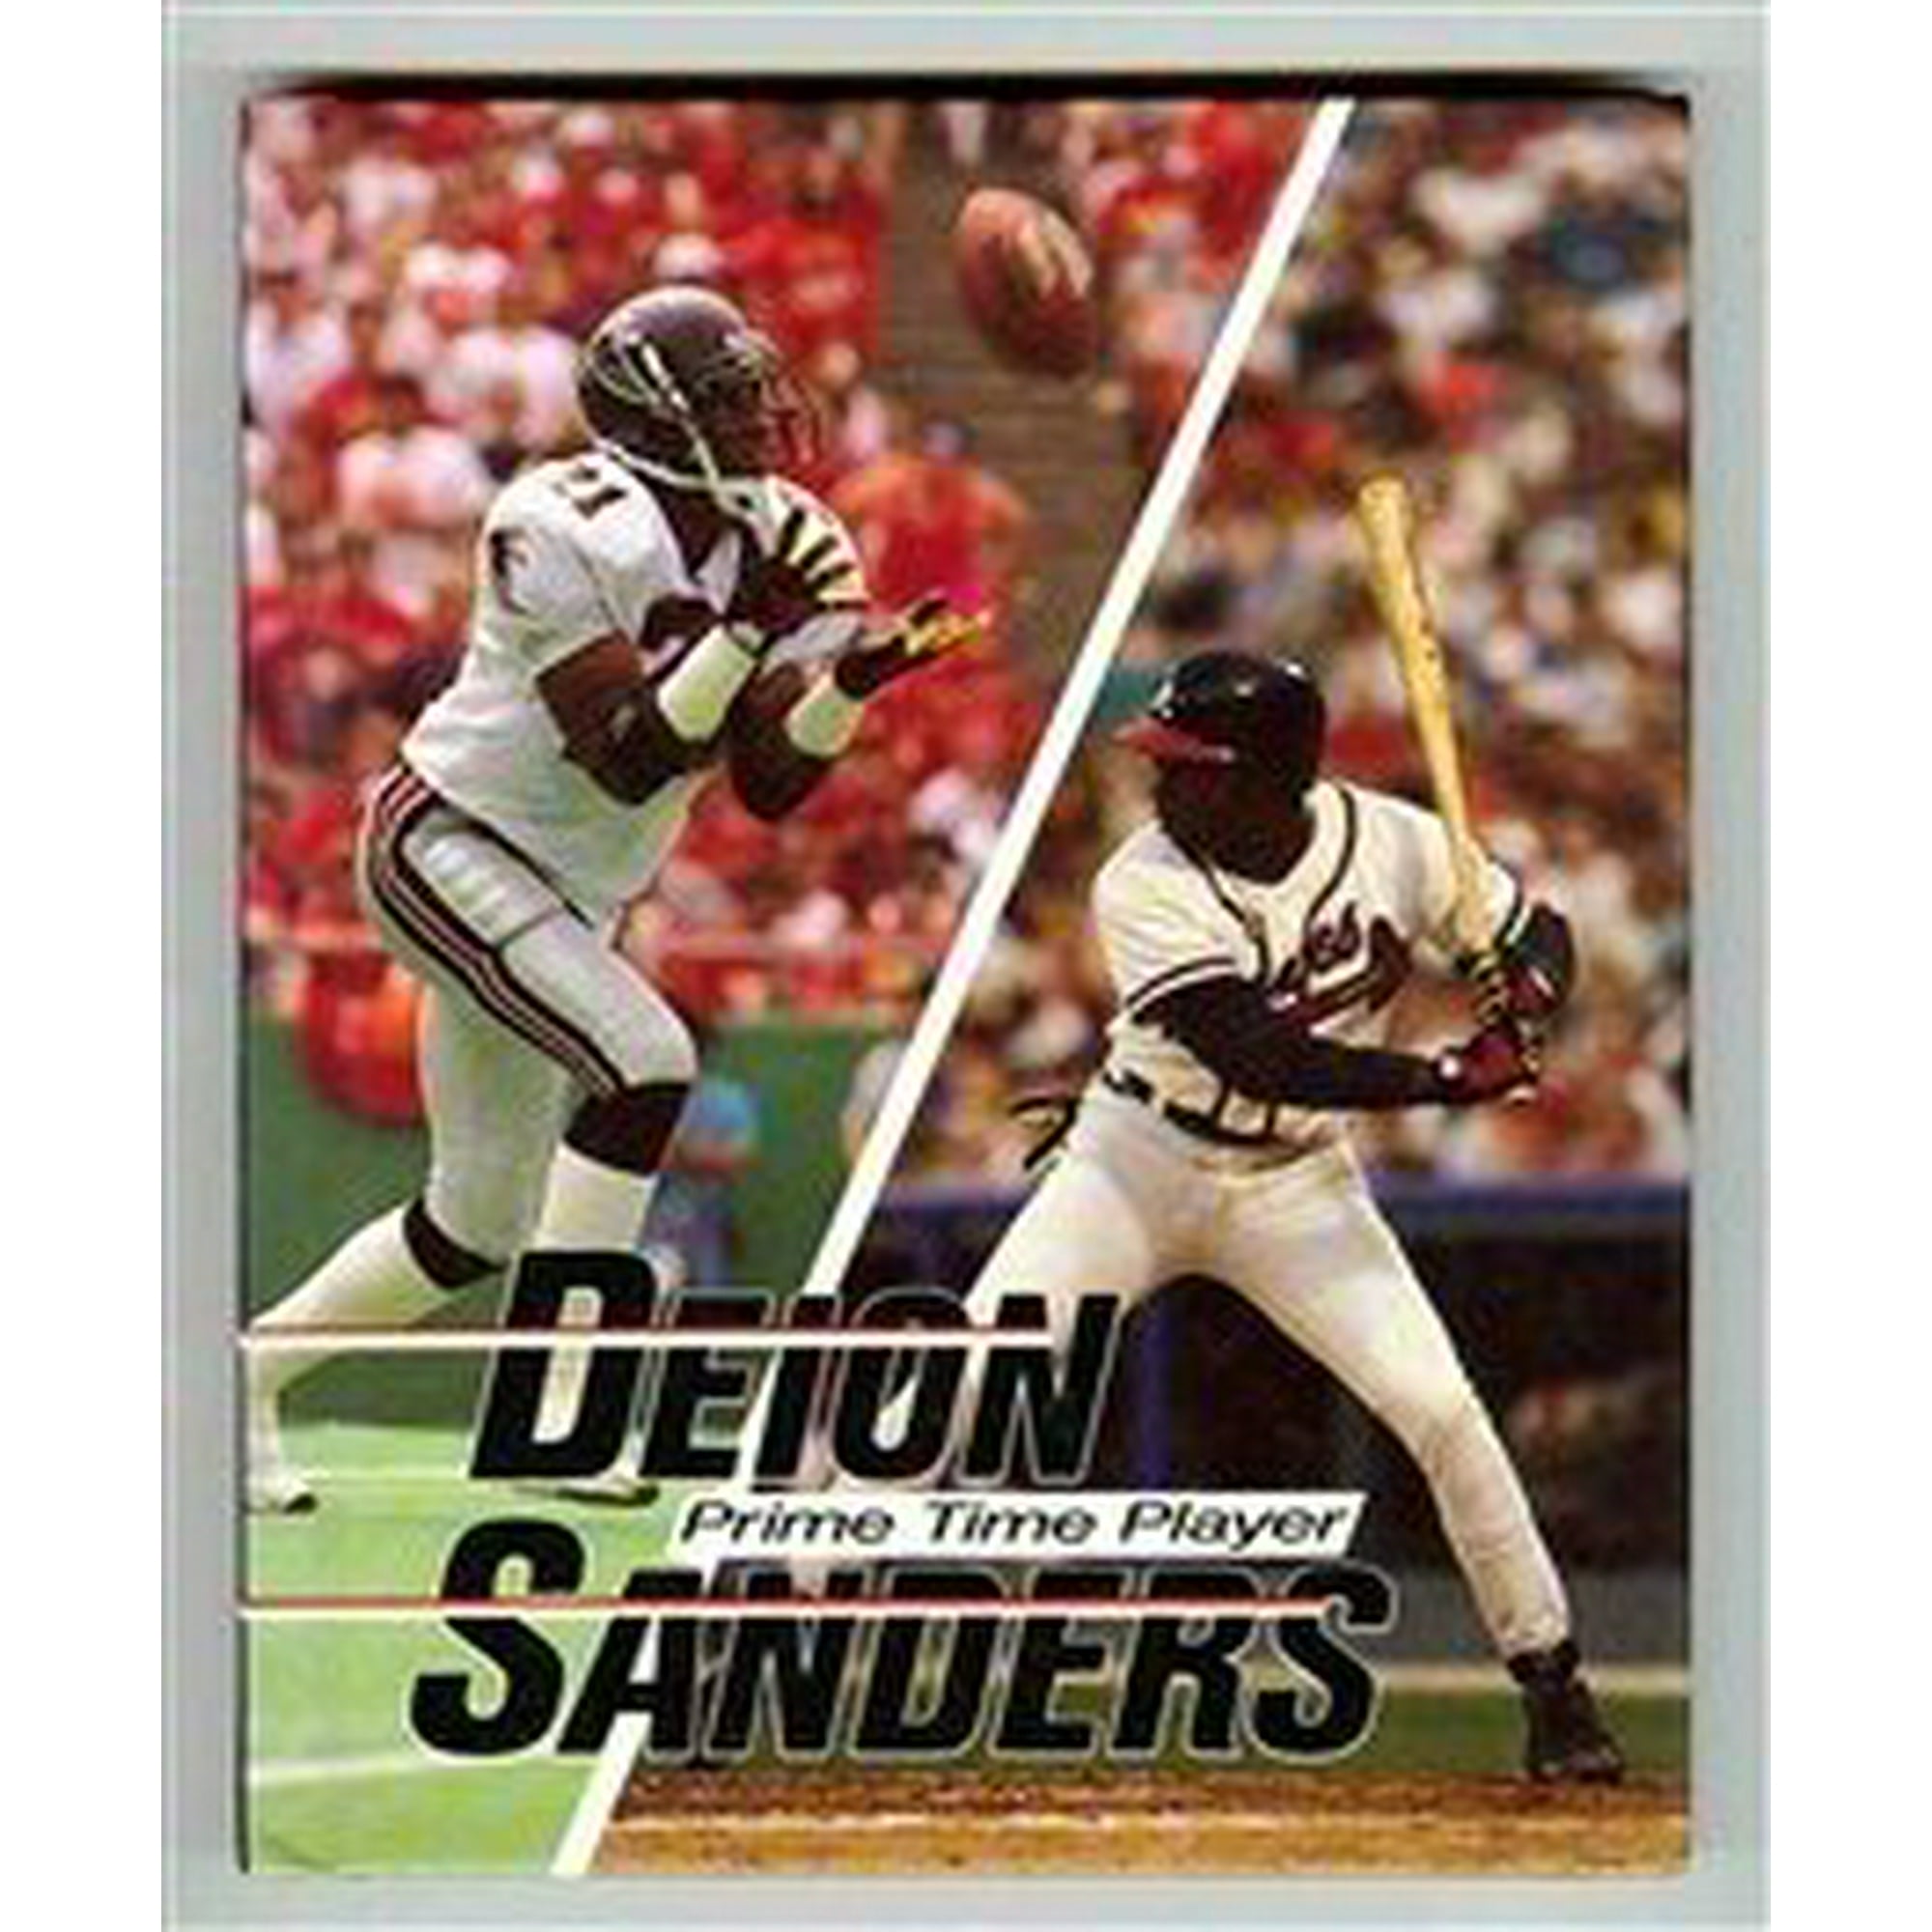 Pre-Owned Deion Sanders: Prime Time Player Achievers Library